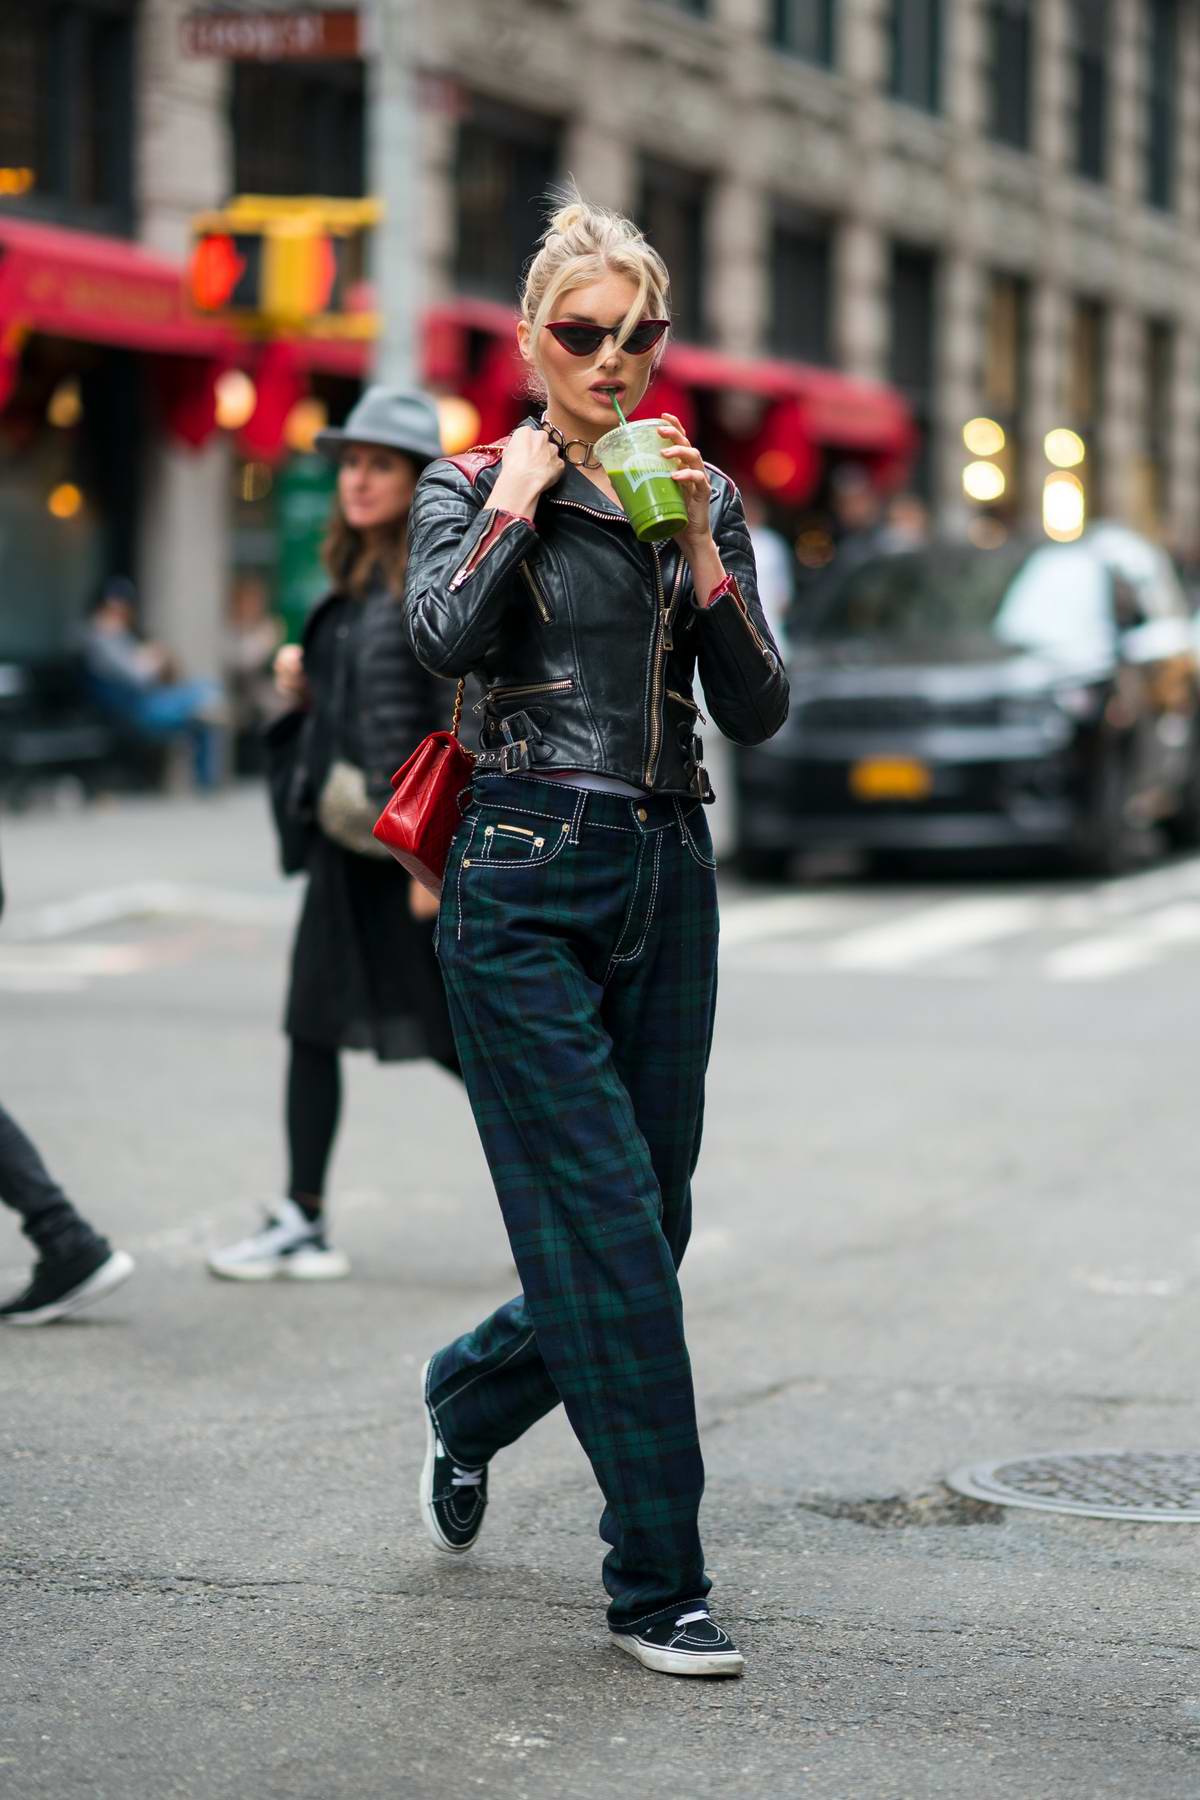 Elsa Hosk looks stylish in a black leather jacket and plaid pants with a red Chanel handbag ...